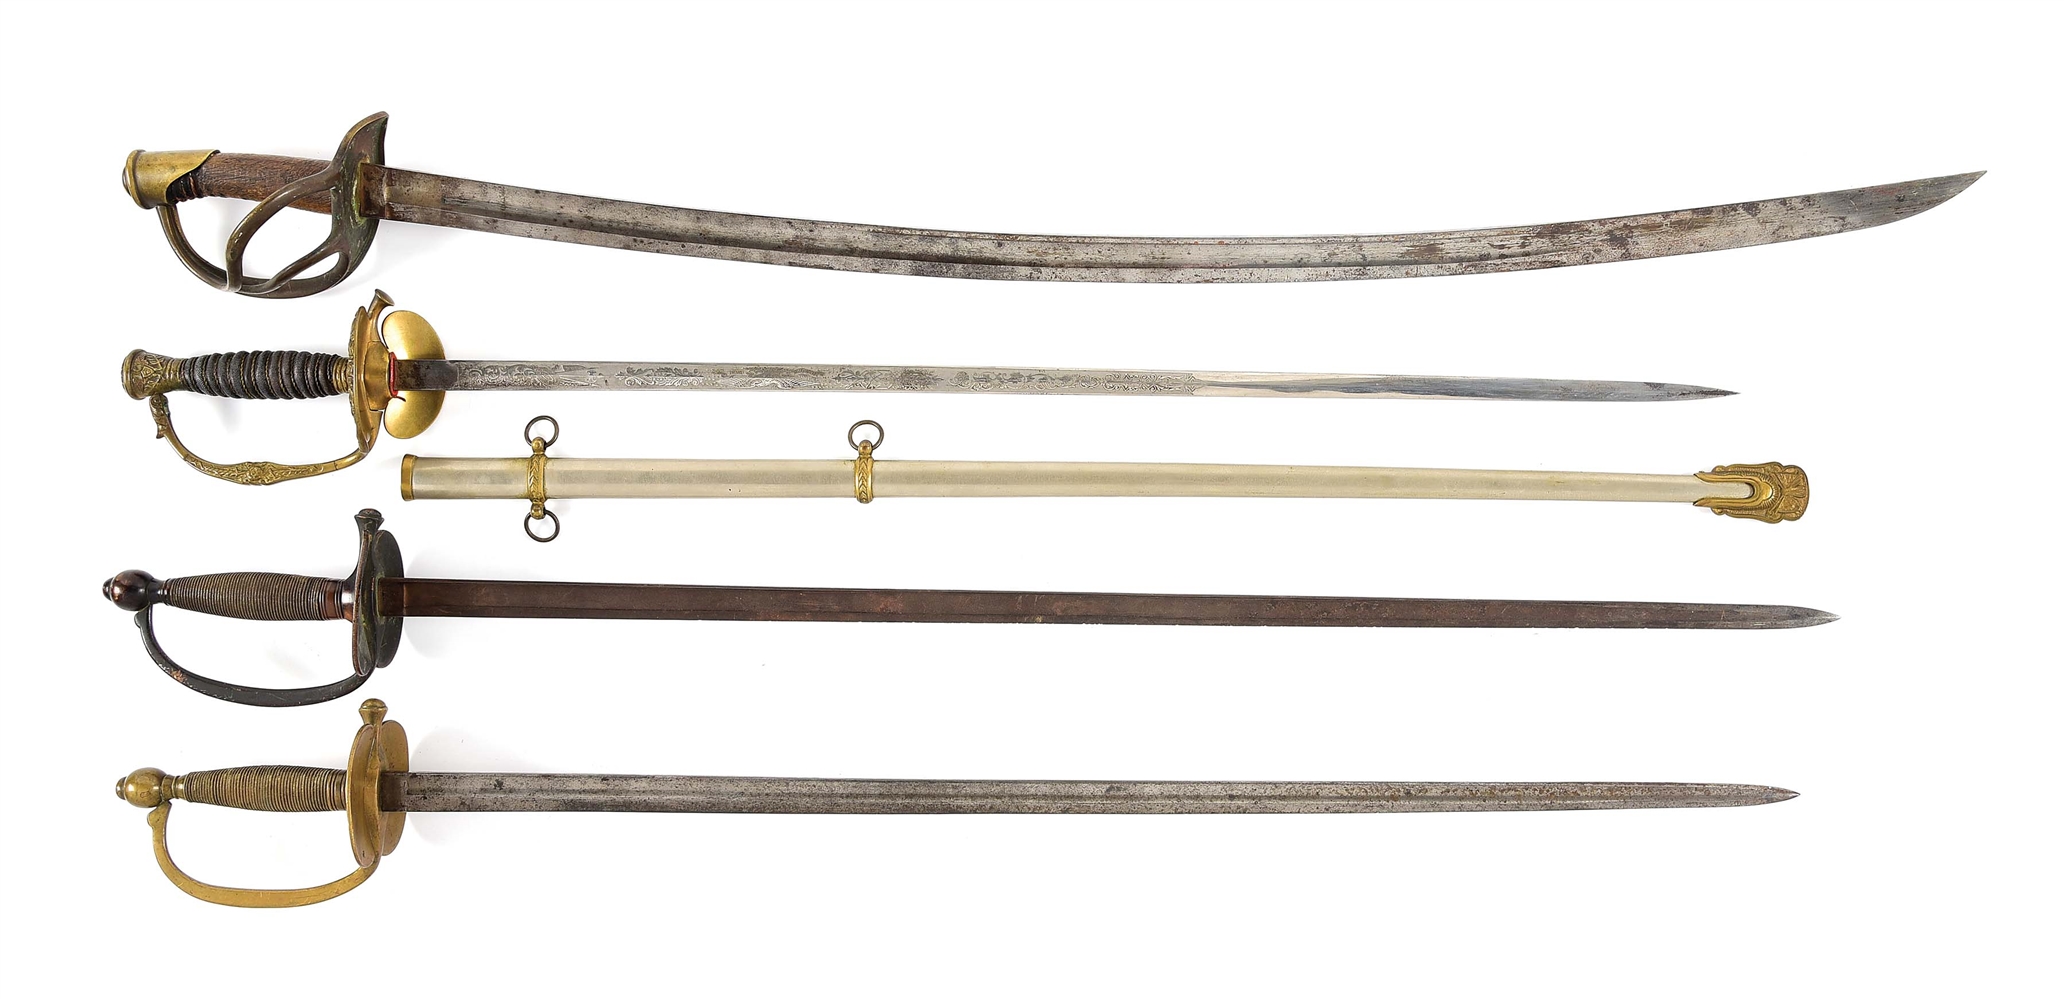 LOT OF 4: US CIVIL WAR M1840 CAVALRY SABER, M1872 STAFF & FIELD OFFICERS SWORD, AND 2 M1840 NCO SWORDS.